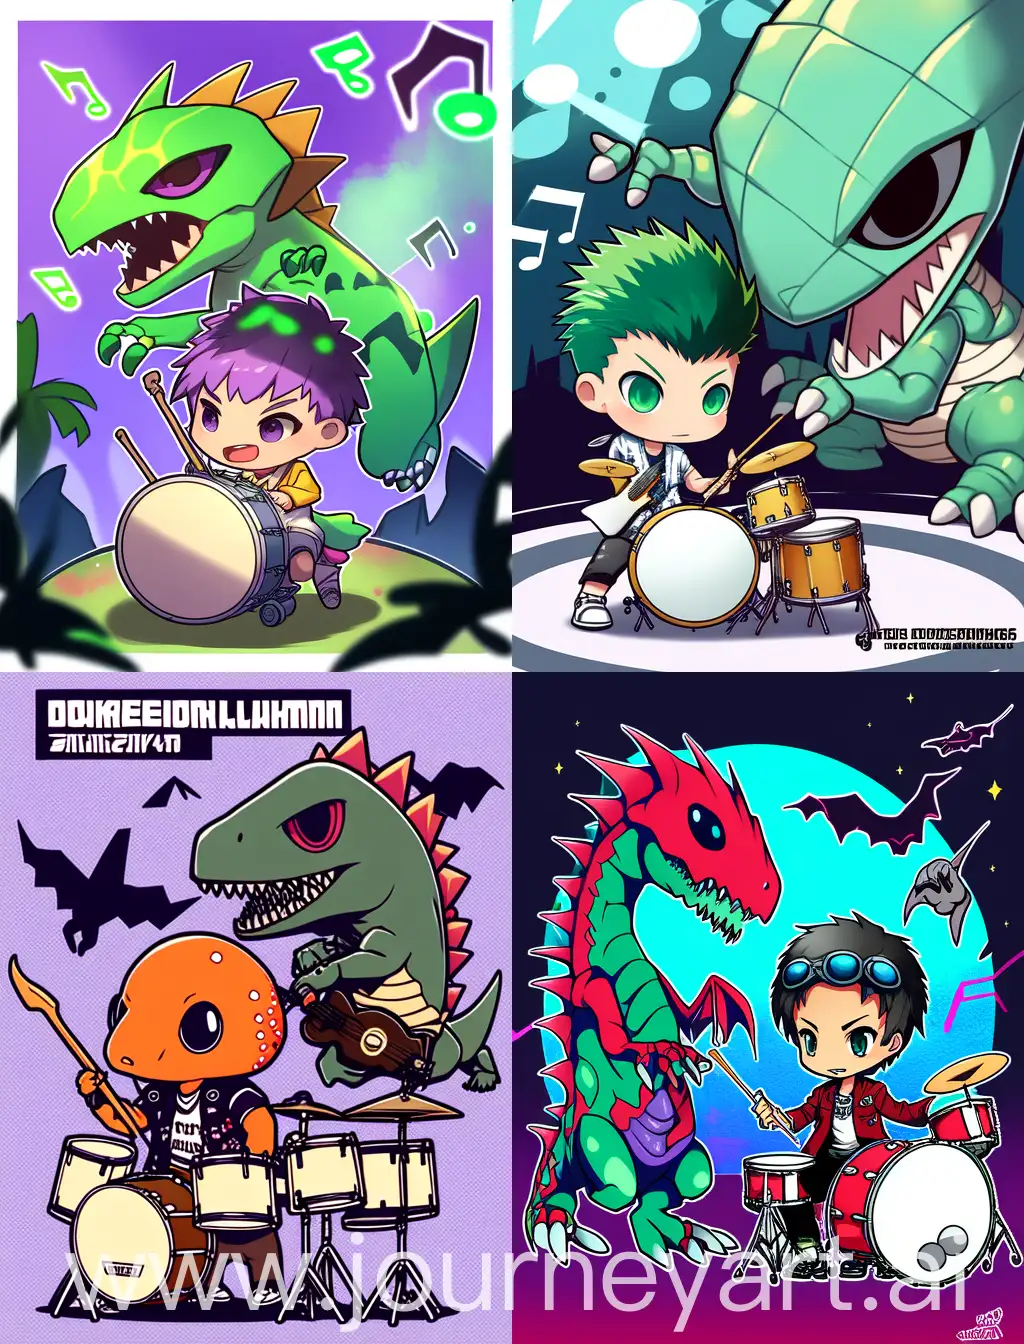 Chibi-Dinosaur-and-Anime-Character-Playing-Drums-in-Spooky-Setting